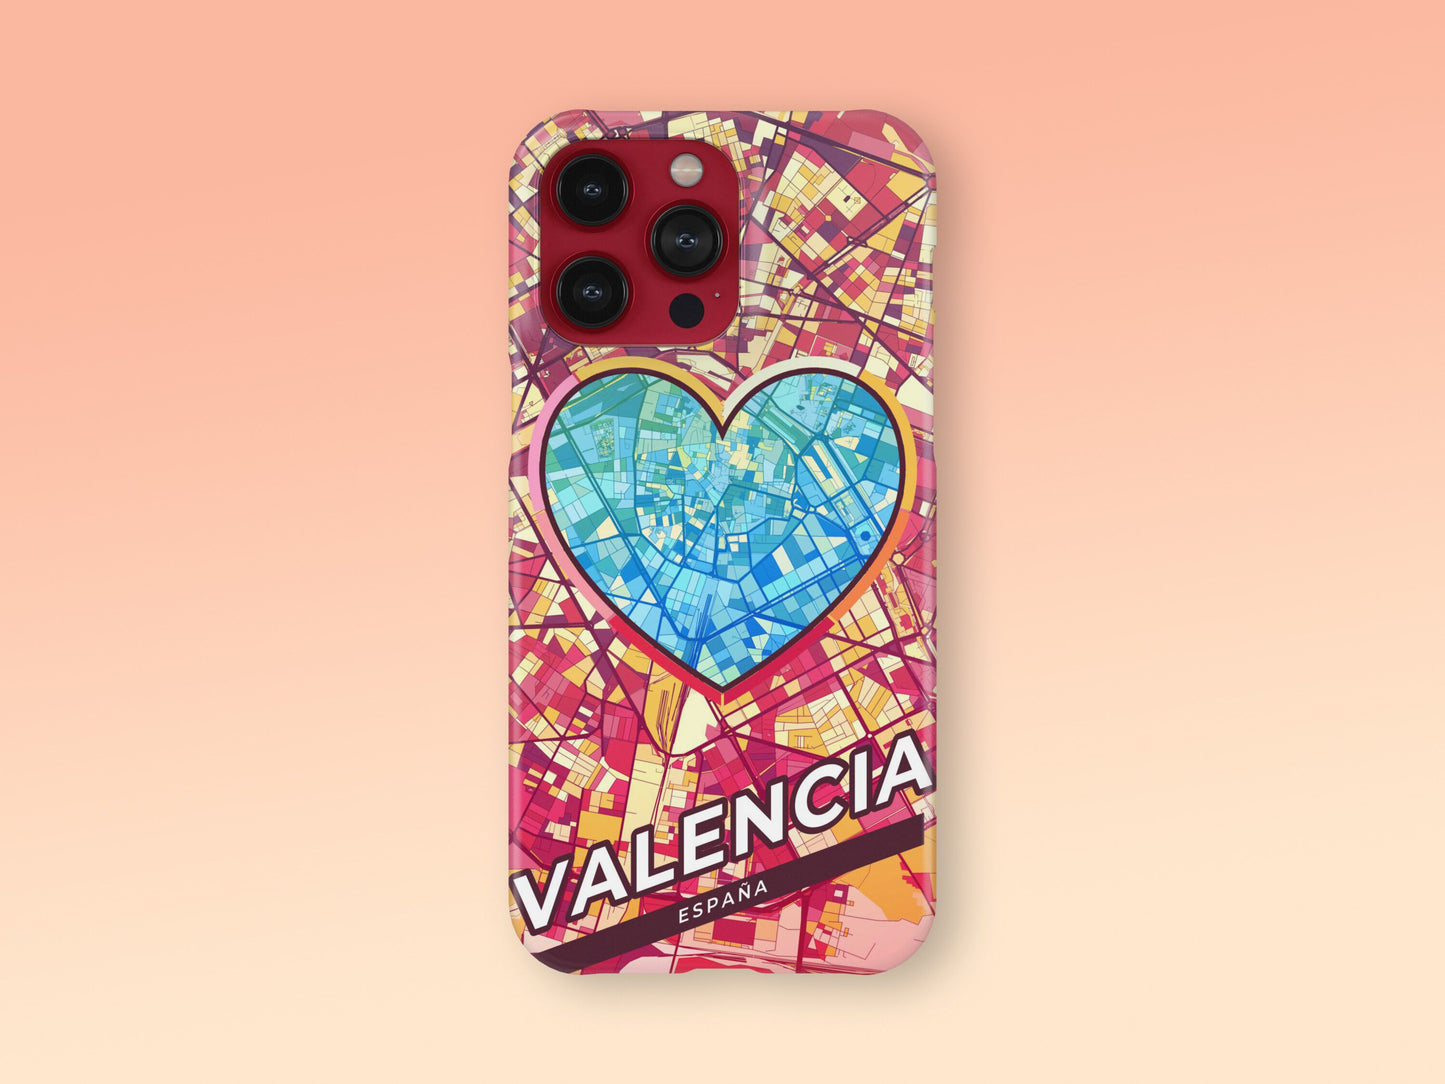 Valencia Spain slim phone case with colorful icon 2